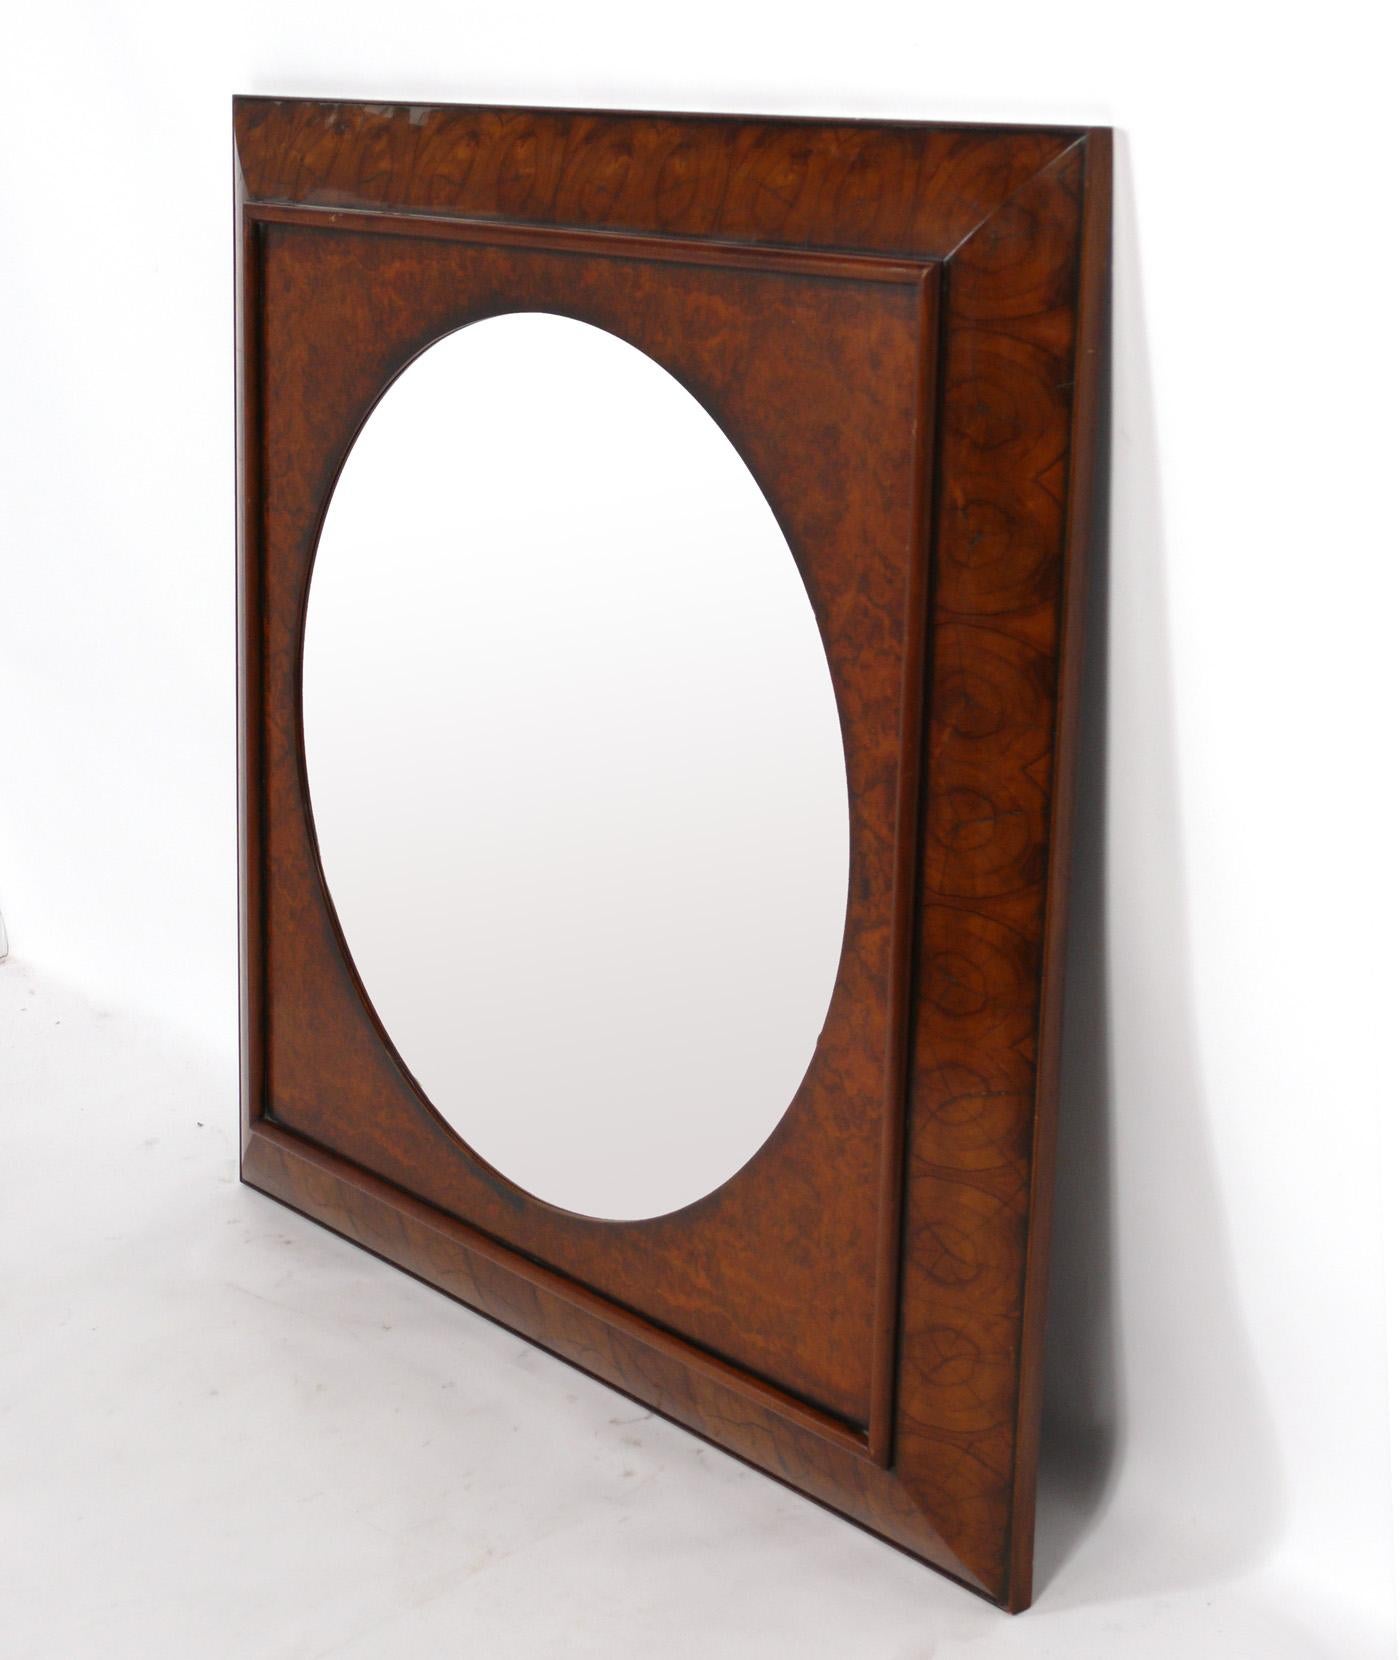 Beautiful Burl Grain Biedermeier Style Mirror, believed to be circa 1960s, possibly earlier. This mirror was recently removed from the legendary Carlyle Hotel in NYC. It measures an impressive 42.25